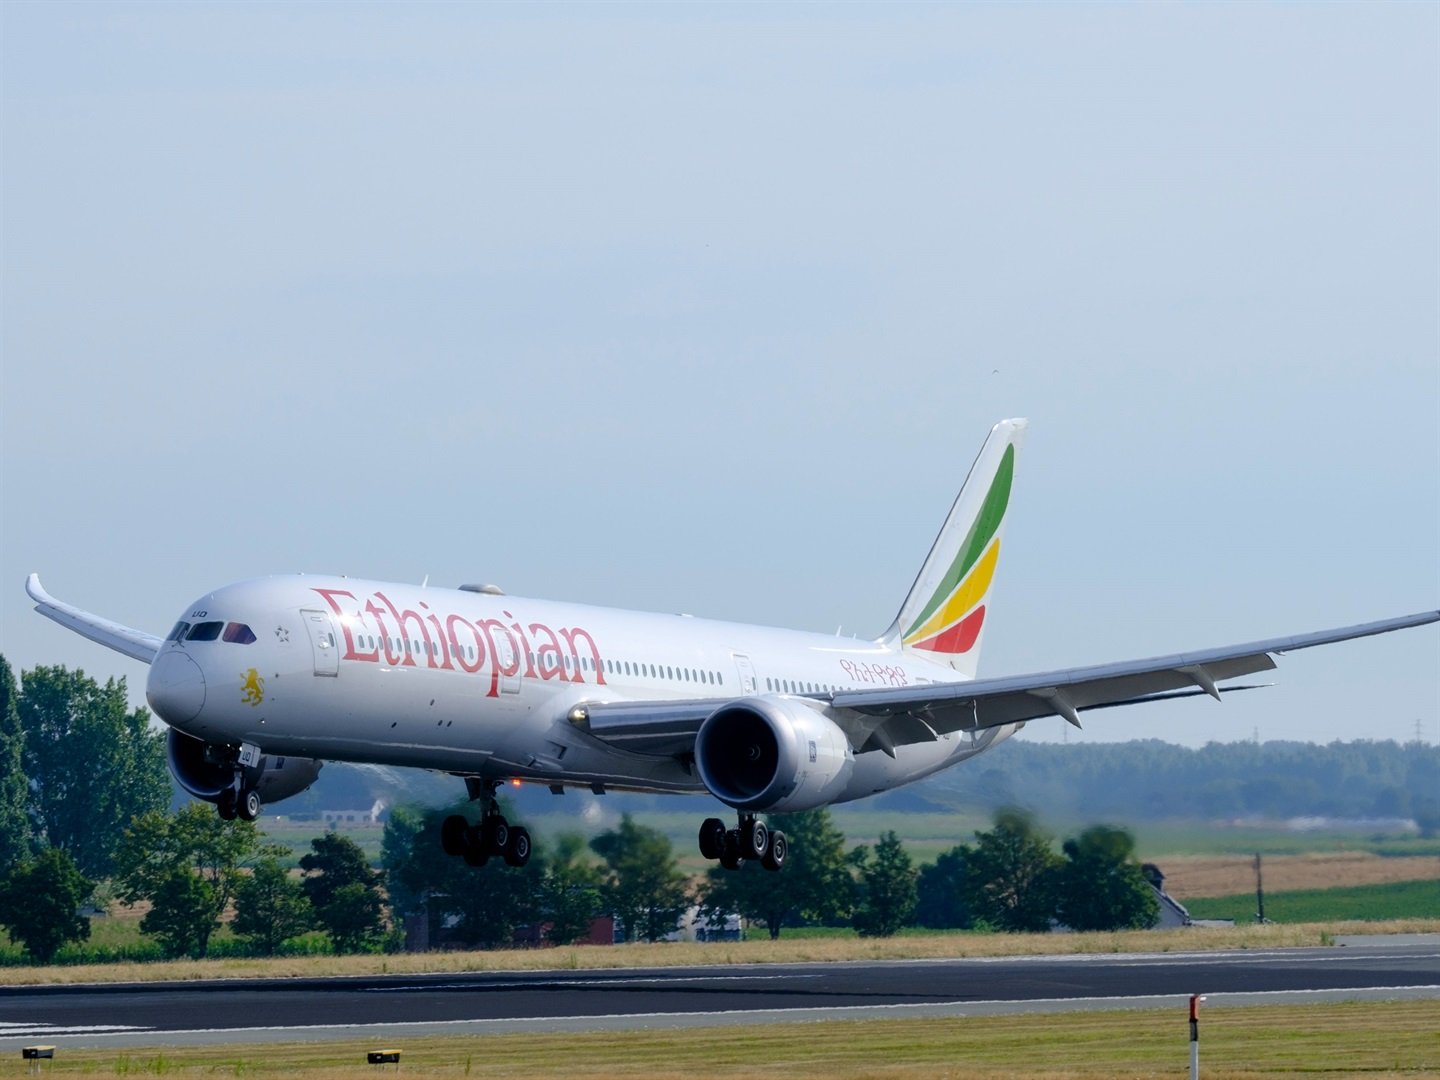 A Zimbabwean father is demanding more than R3 million in damages from Ethiopian Airlines. (Thierry Monasse/Getty Images)